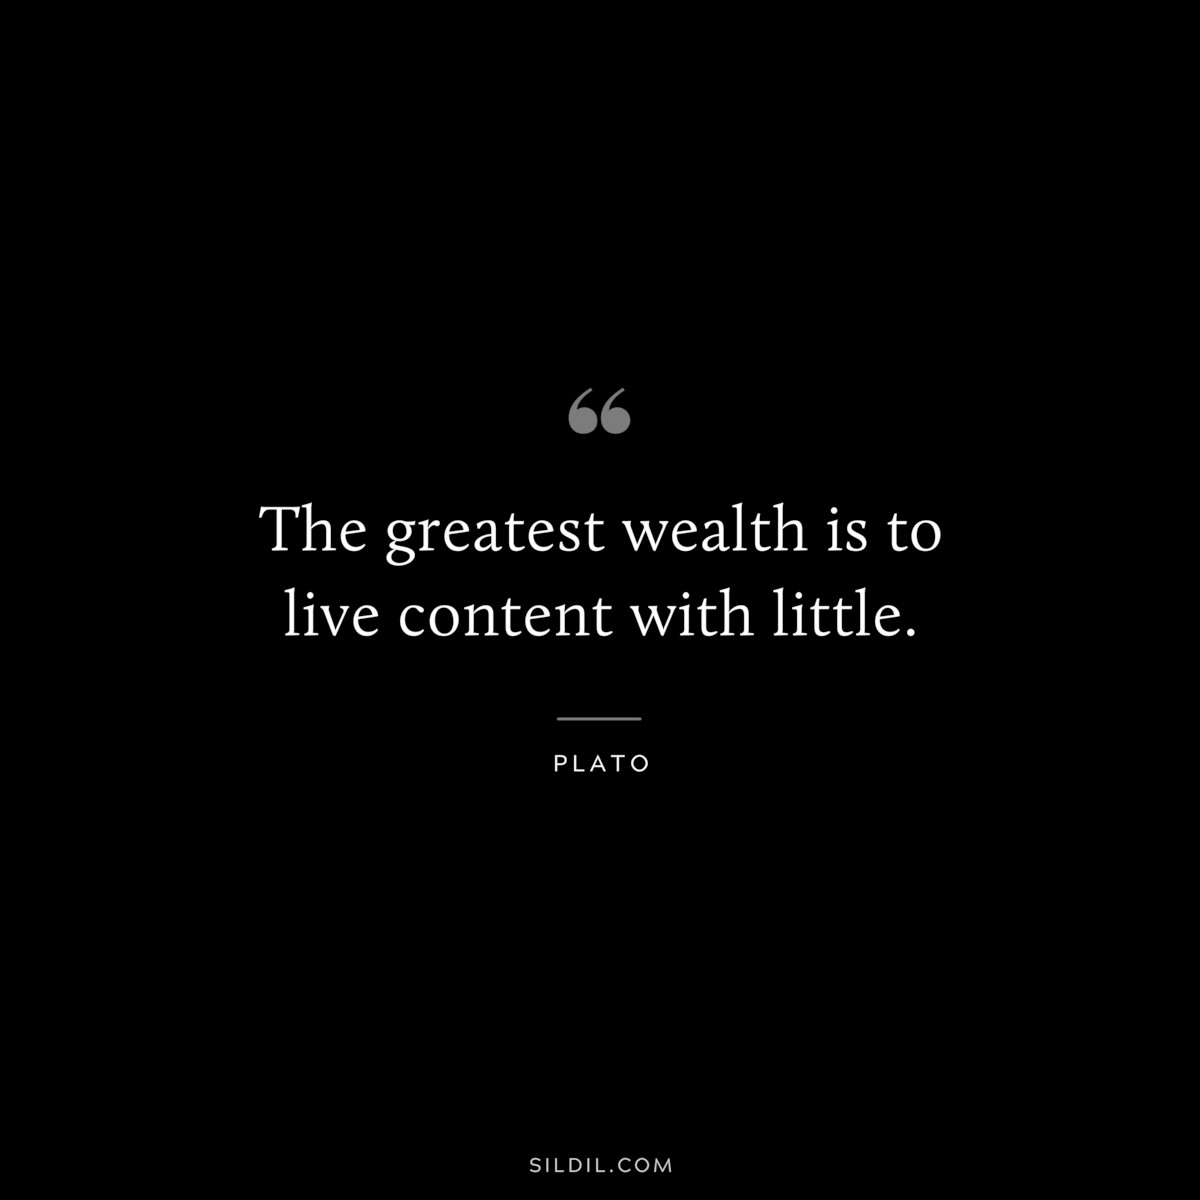 The greatest wealth is to live content with little. ― Plato